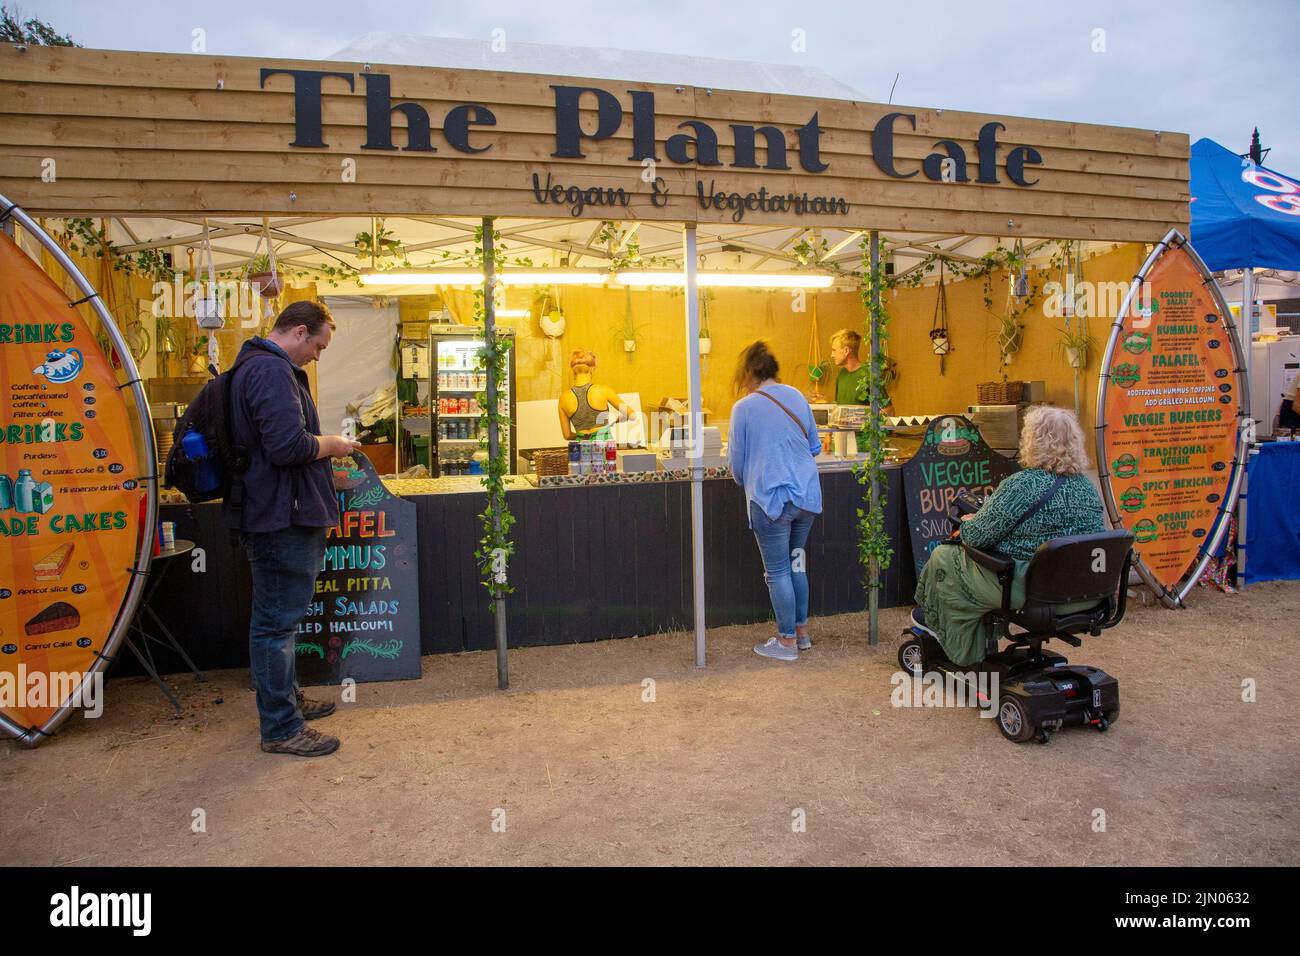 Vegan and vegetarian pop up cafe, The Plant Cafe, food, eating outdoors, al fresco Stock Photo